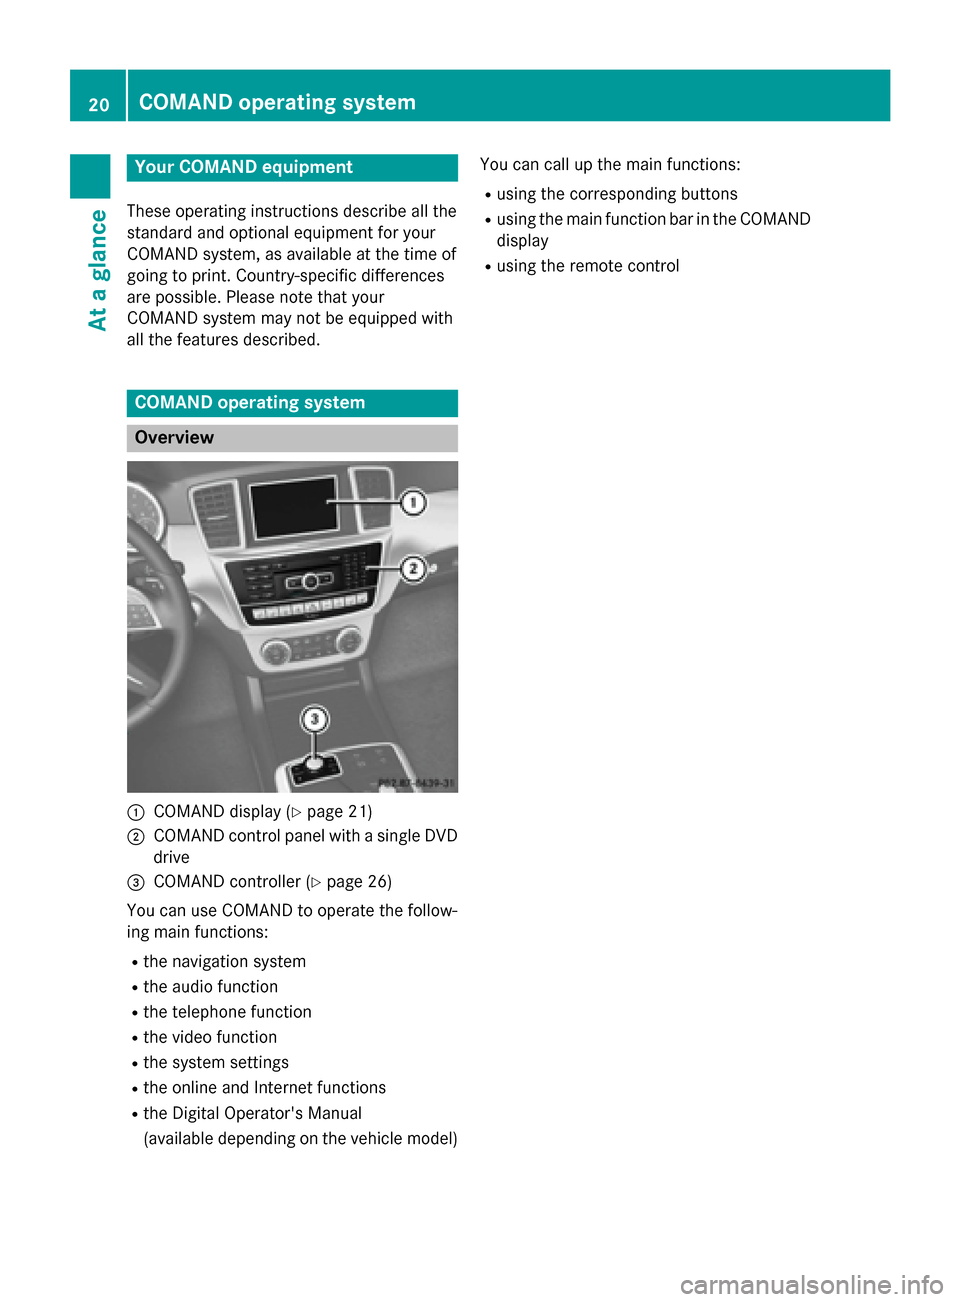 MERCEDES-BENZ C-Class 2014 W204 Comand Manual Your COMAND equipment
These operating instructions describe all the
standard and optional equipment for your
COMAND system, as available at the time of
going to print. Country-specific differences
are